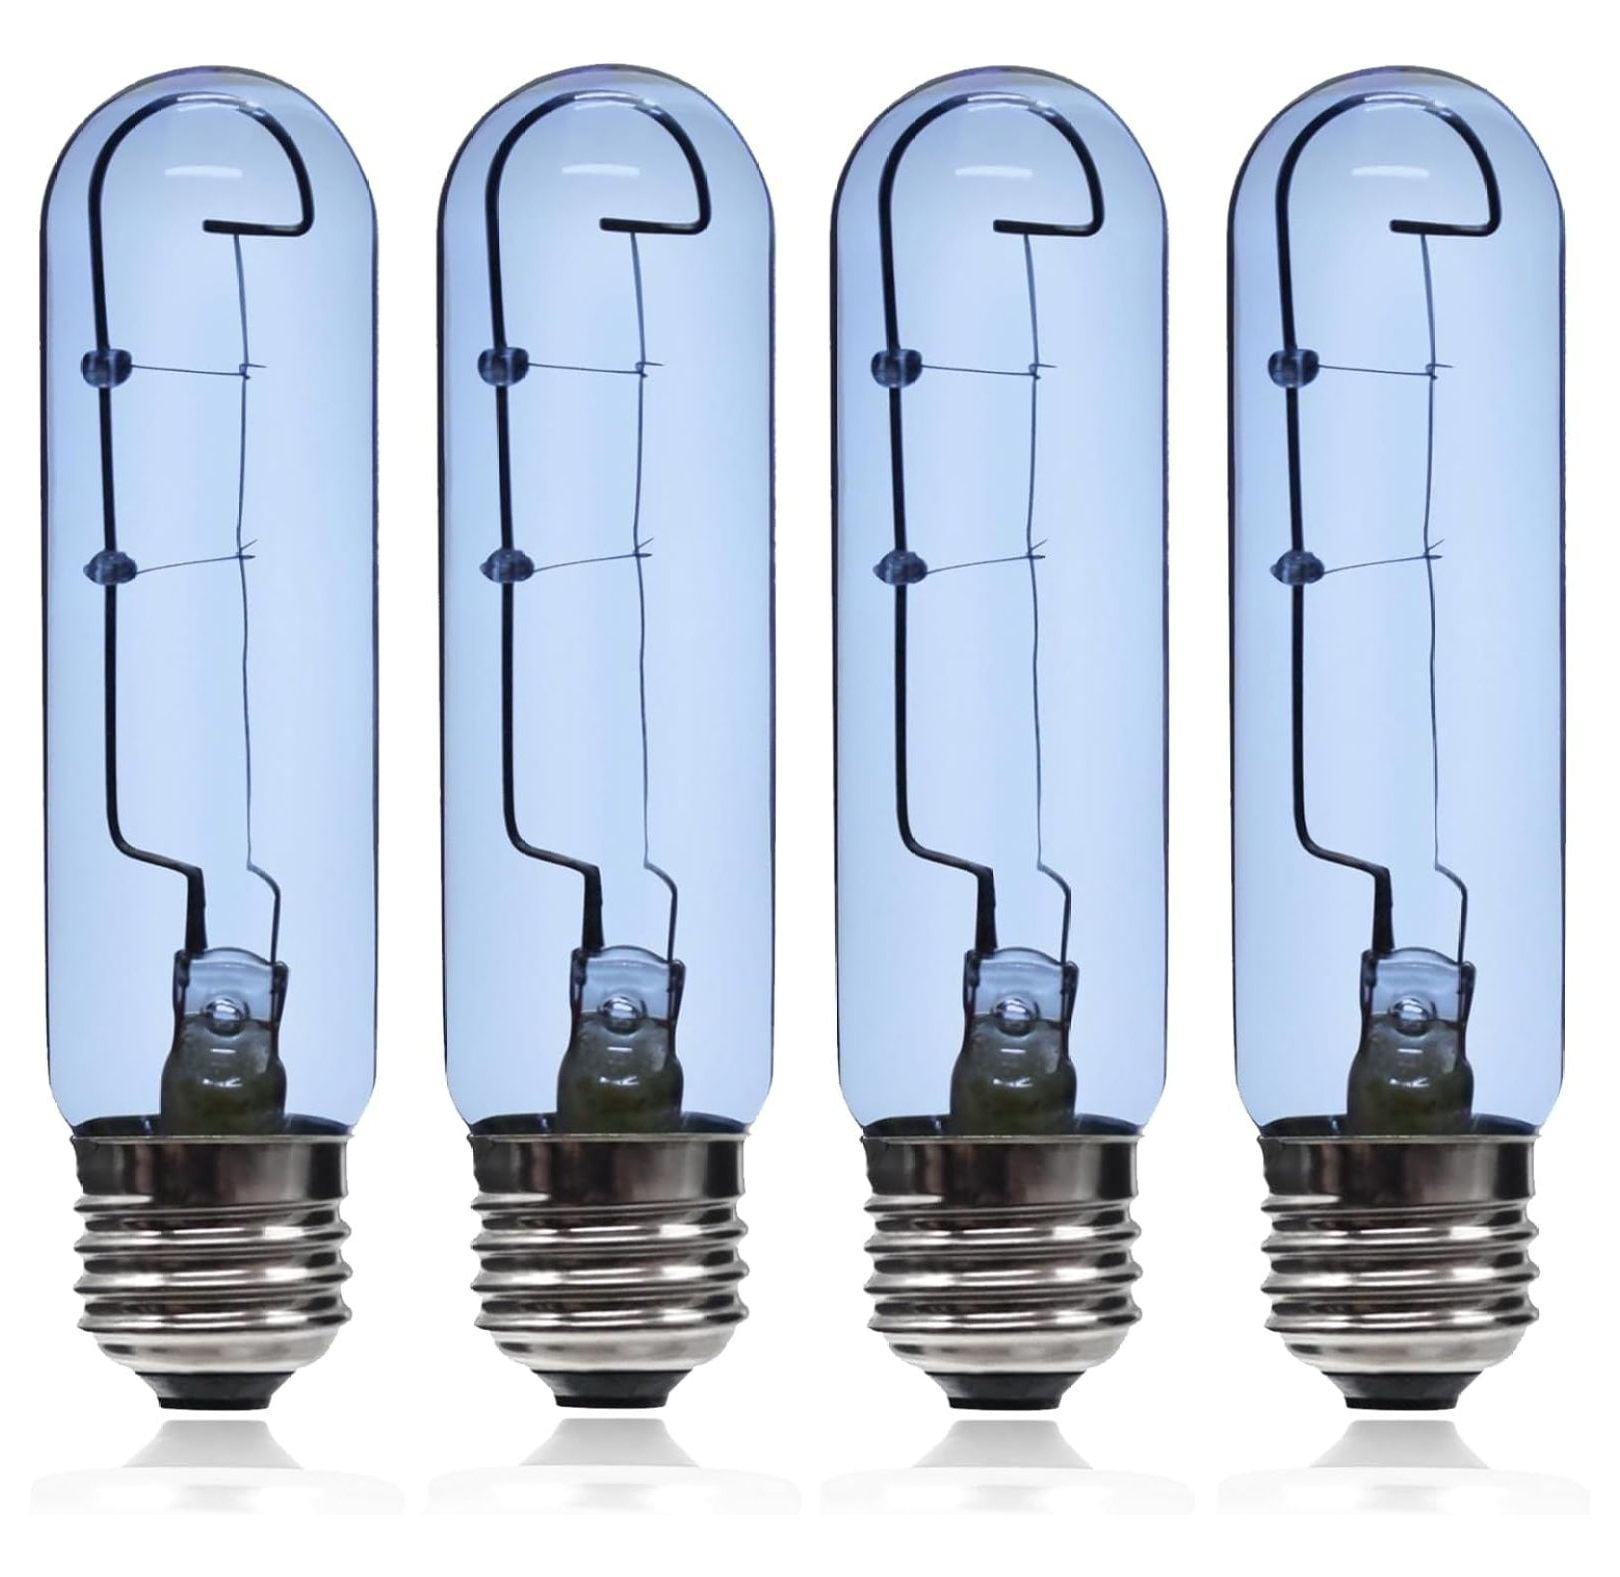 2023 Upgrade 7006999 Blue Glass Replacement Bulb Compatible with sub-zero  Refrigerator,7006999 Blue Glass Lamp Light Bulb E26 40W Cool Blue  Refrigerator Bulbs - 4 Pack,10 Year Warranty 